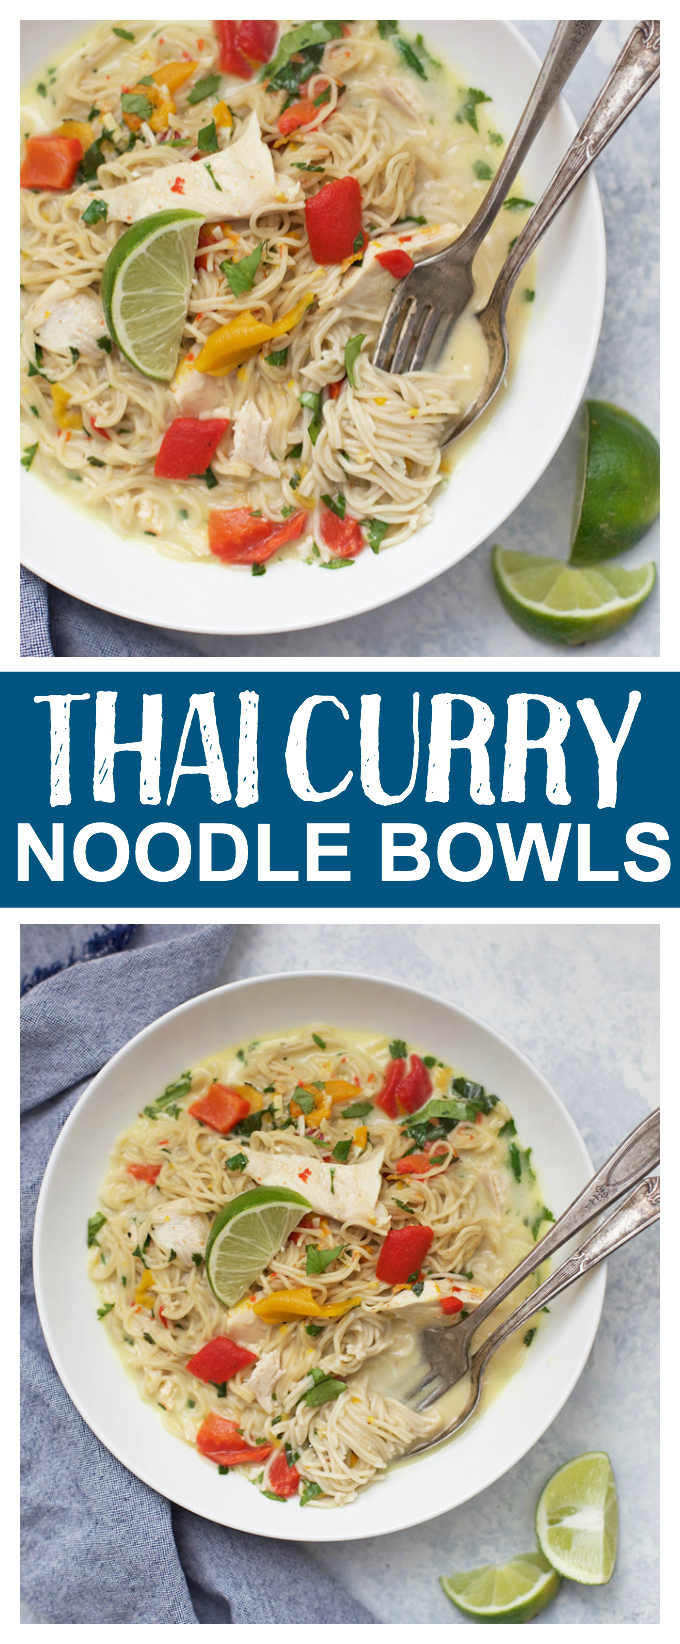 Thai Curry Noodle Bowls - There are few things I'd rather be slurping! Use chicken, shrimp, or veggies and dinner is on the table in no time! 